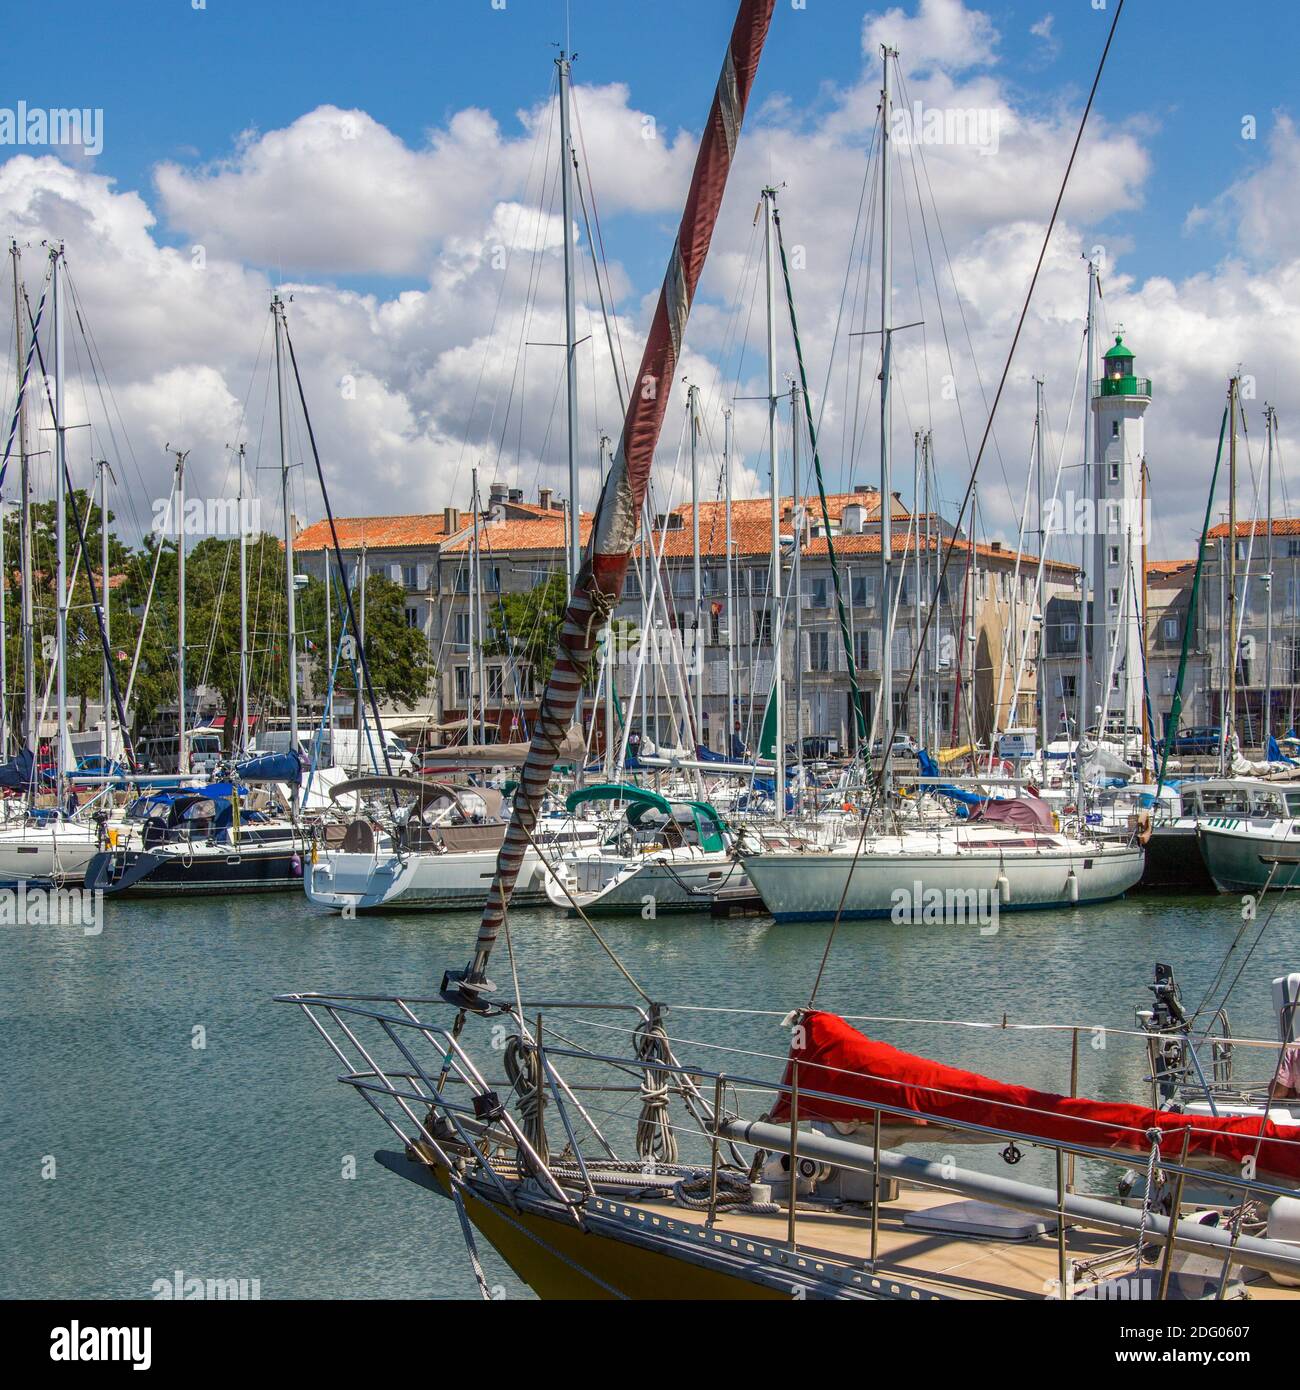 The port of La Rochelle on the coast of the Poitou-Charentes region of France. Stock Photo